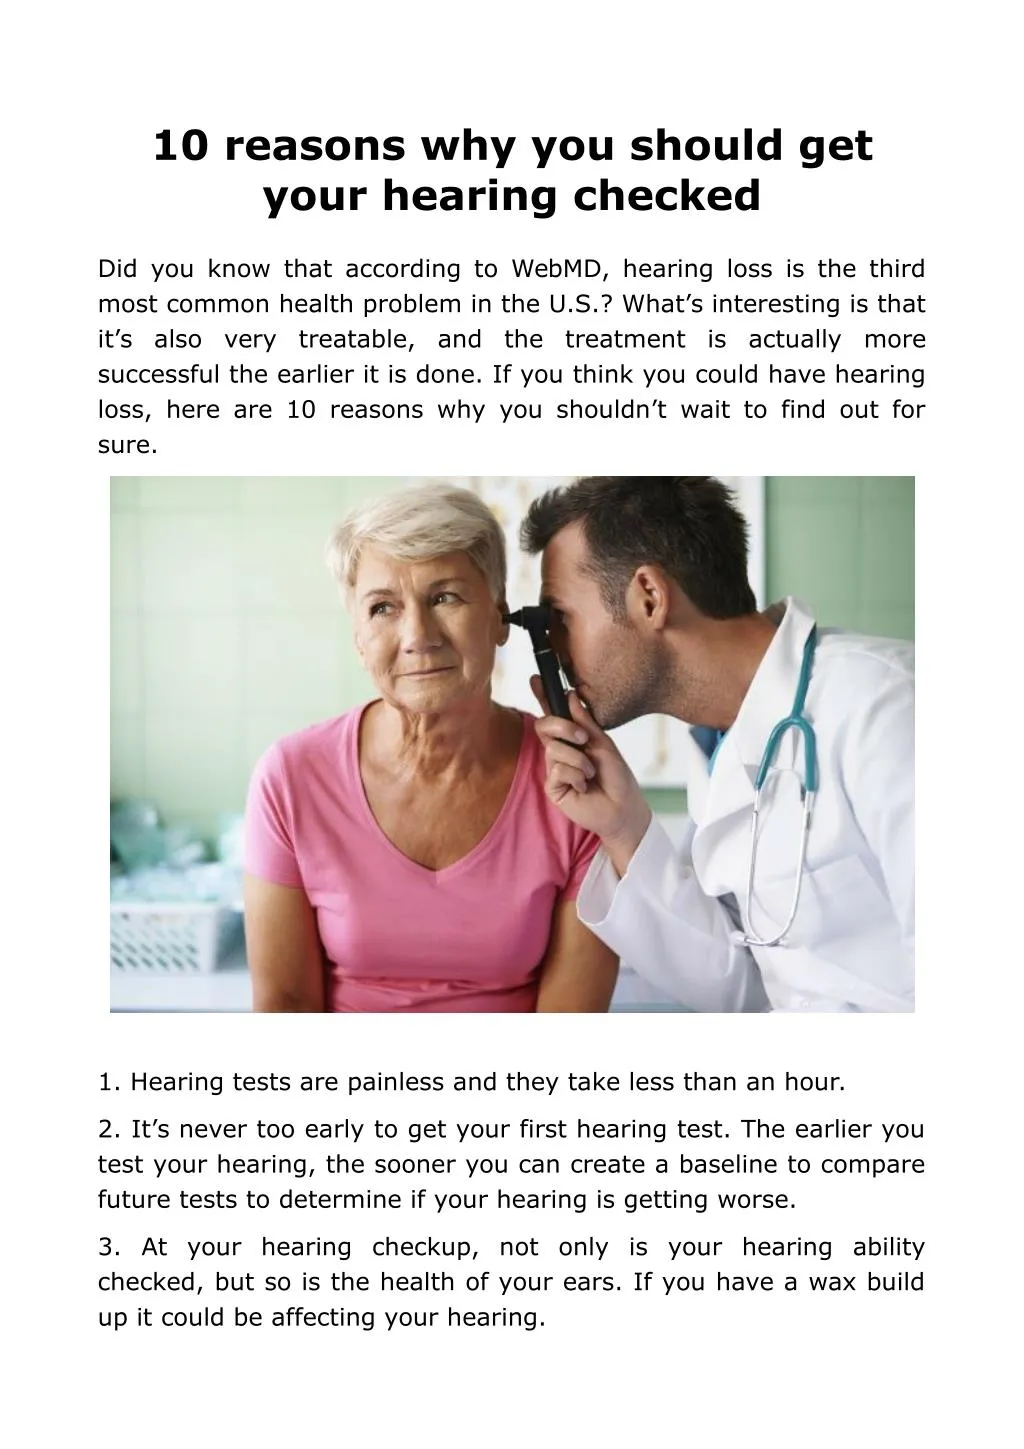 10 reasons why you should get your hearing checked